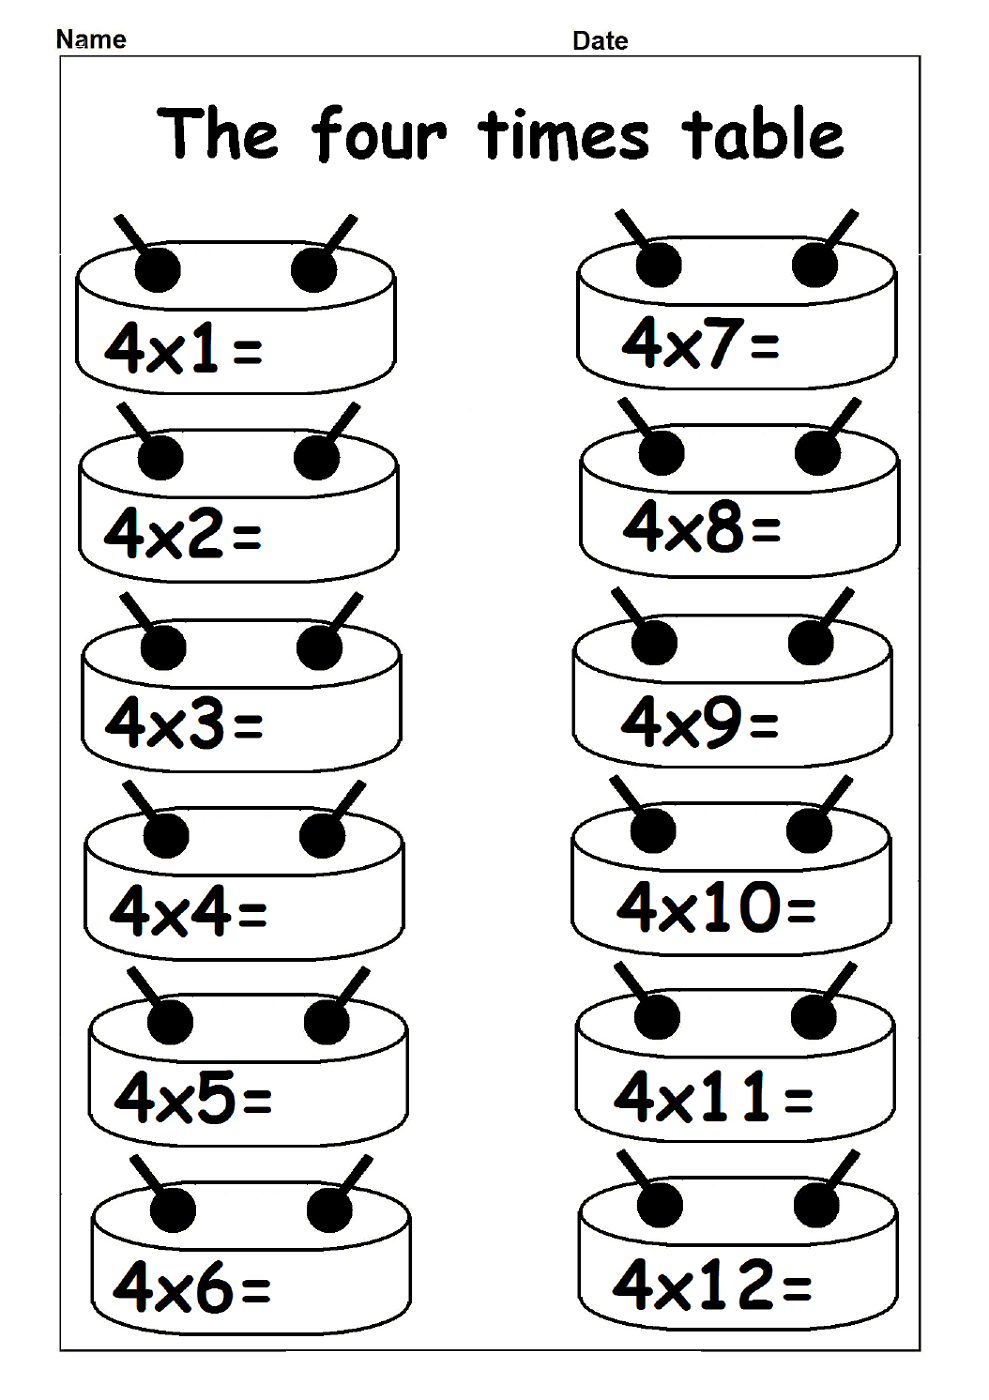 4 times table worksheets multiplication